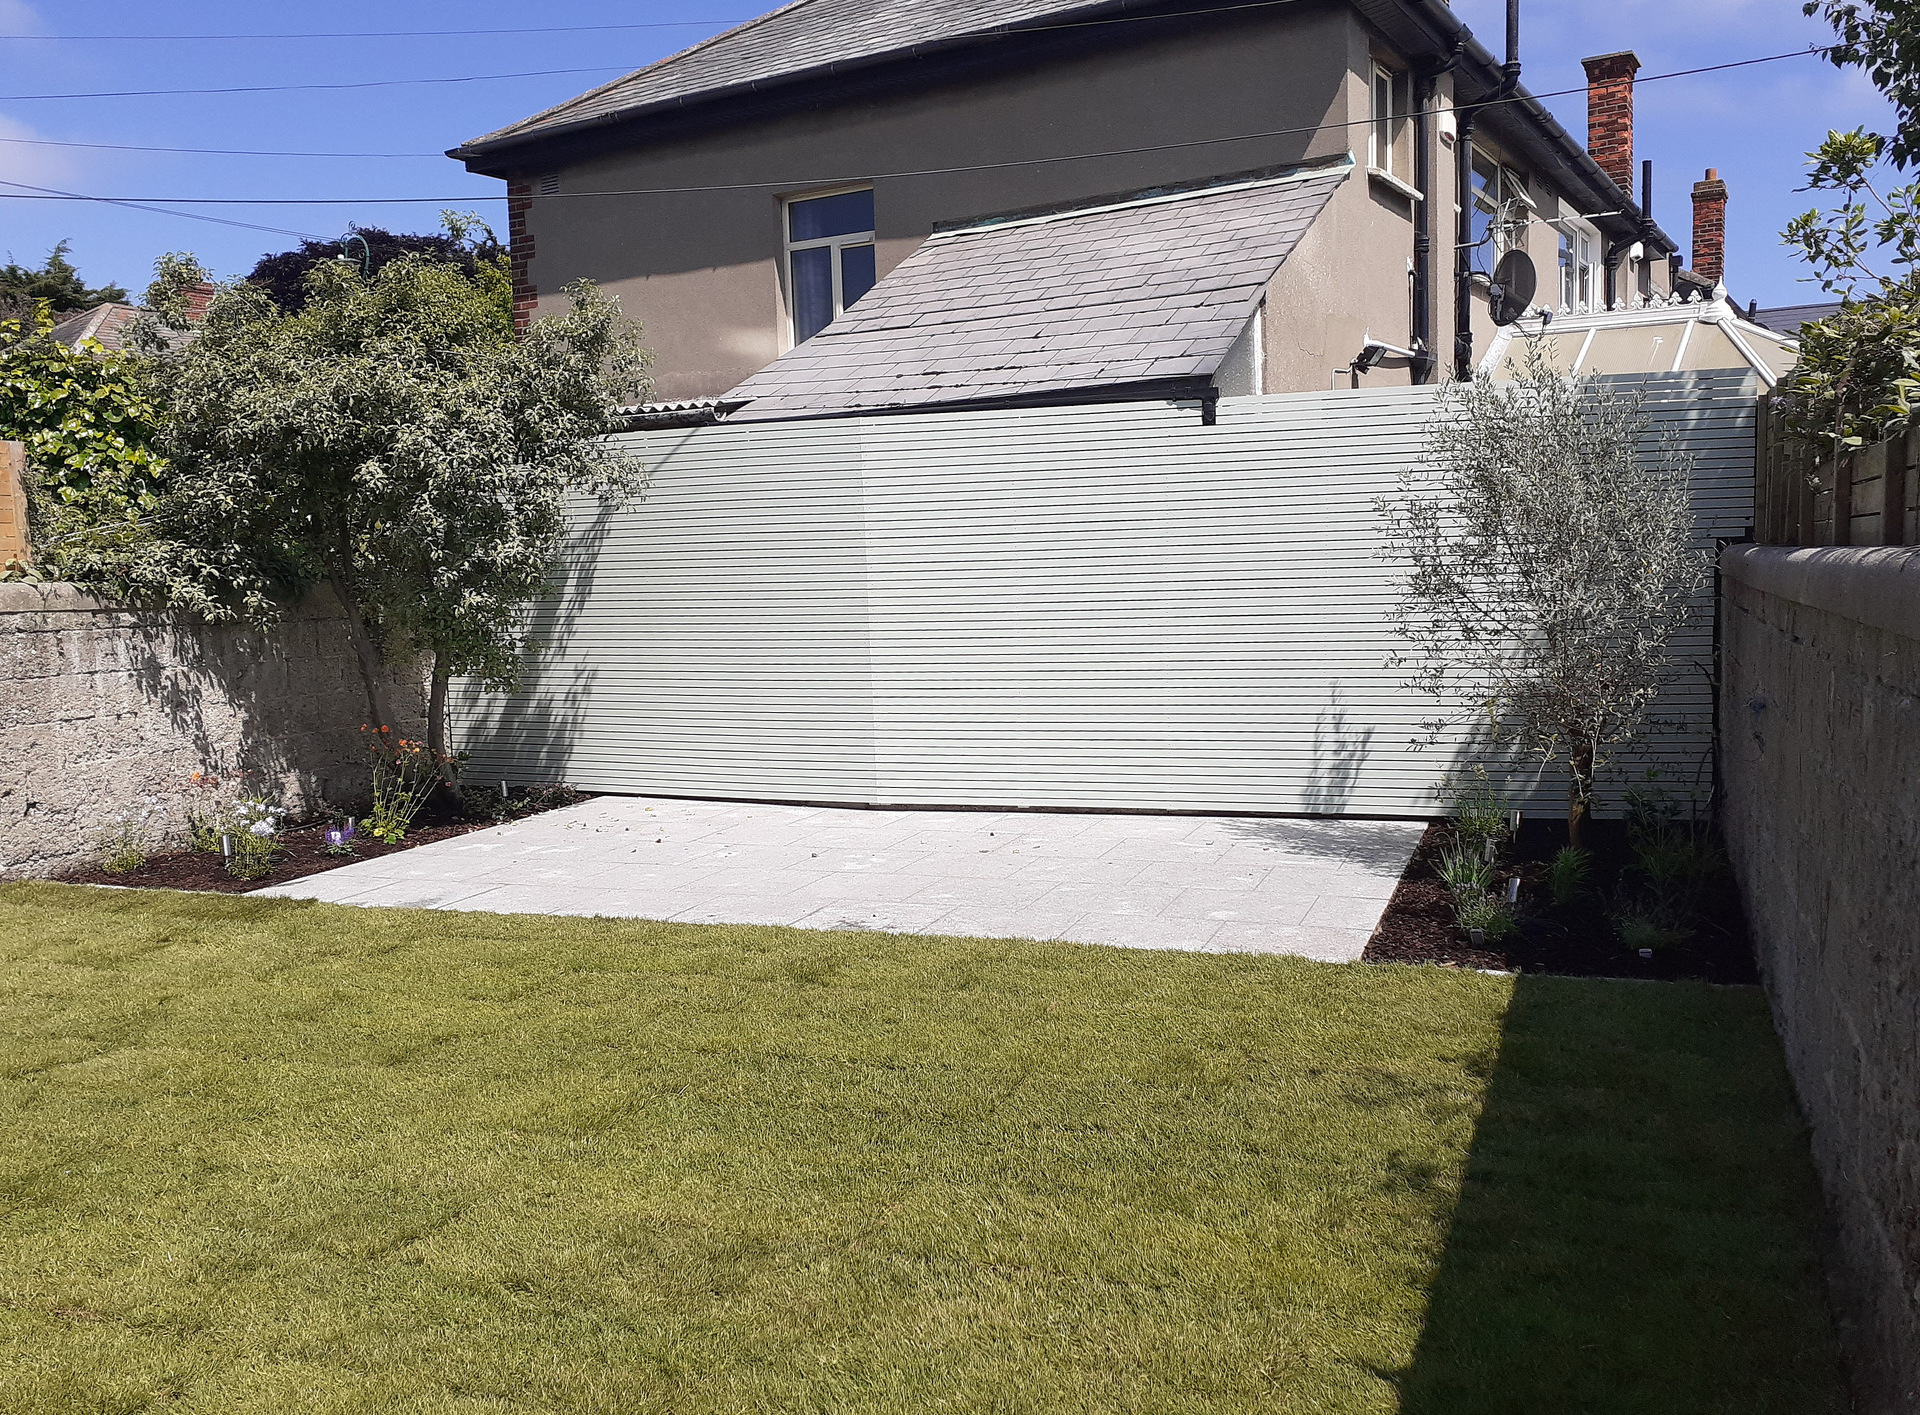 Horizontal Timber Slat Fencing with painted finish, supplied + installed in Sandymount, Dublin 4.  We have extensive experience in design & installation of bespoke & custom made fencing & screening solutions, custom made to individual customer's specific requirements.  Custom made = Better made.